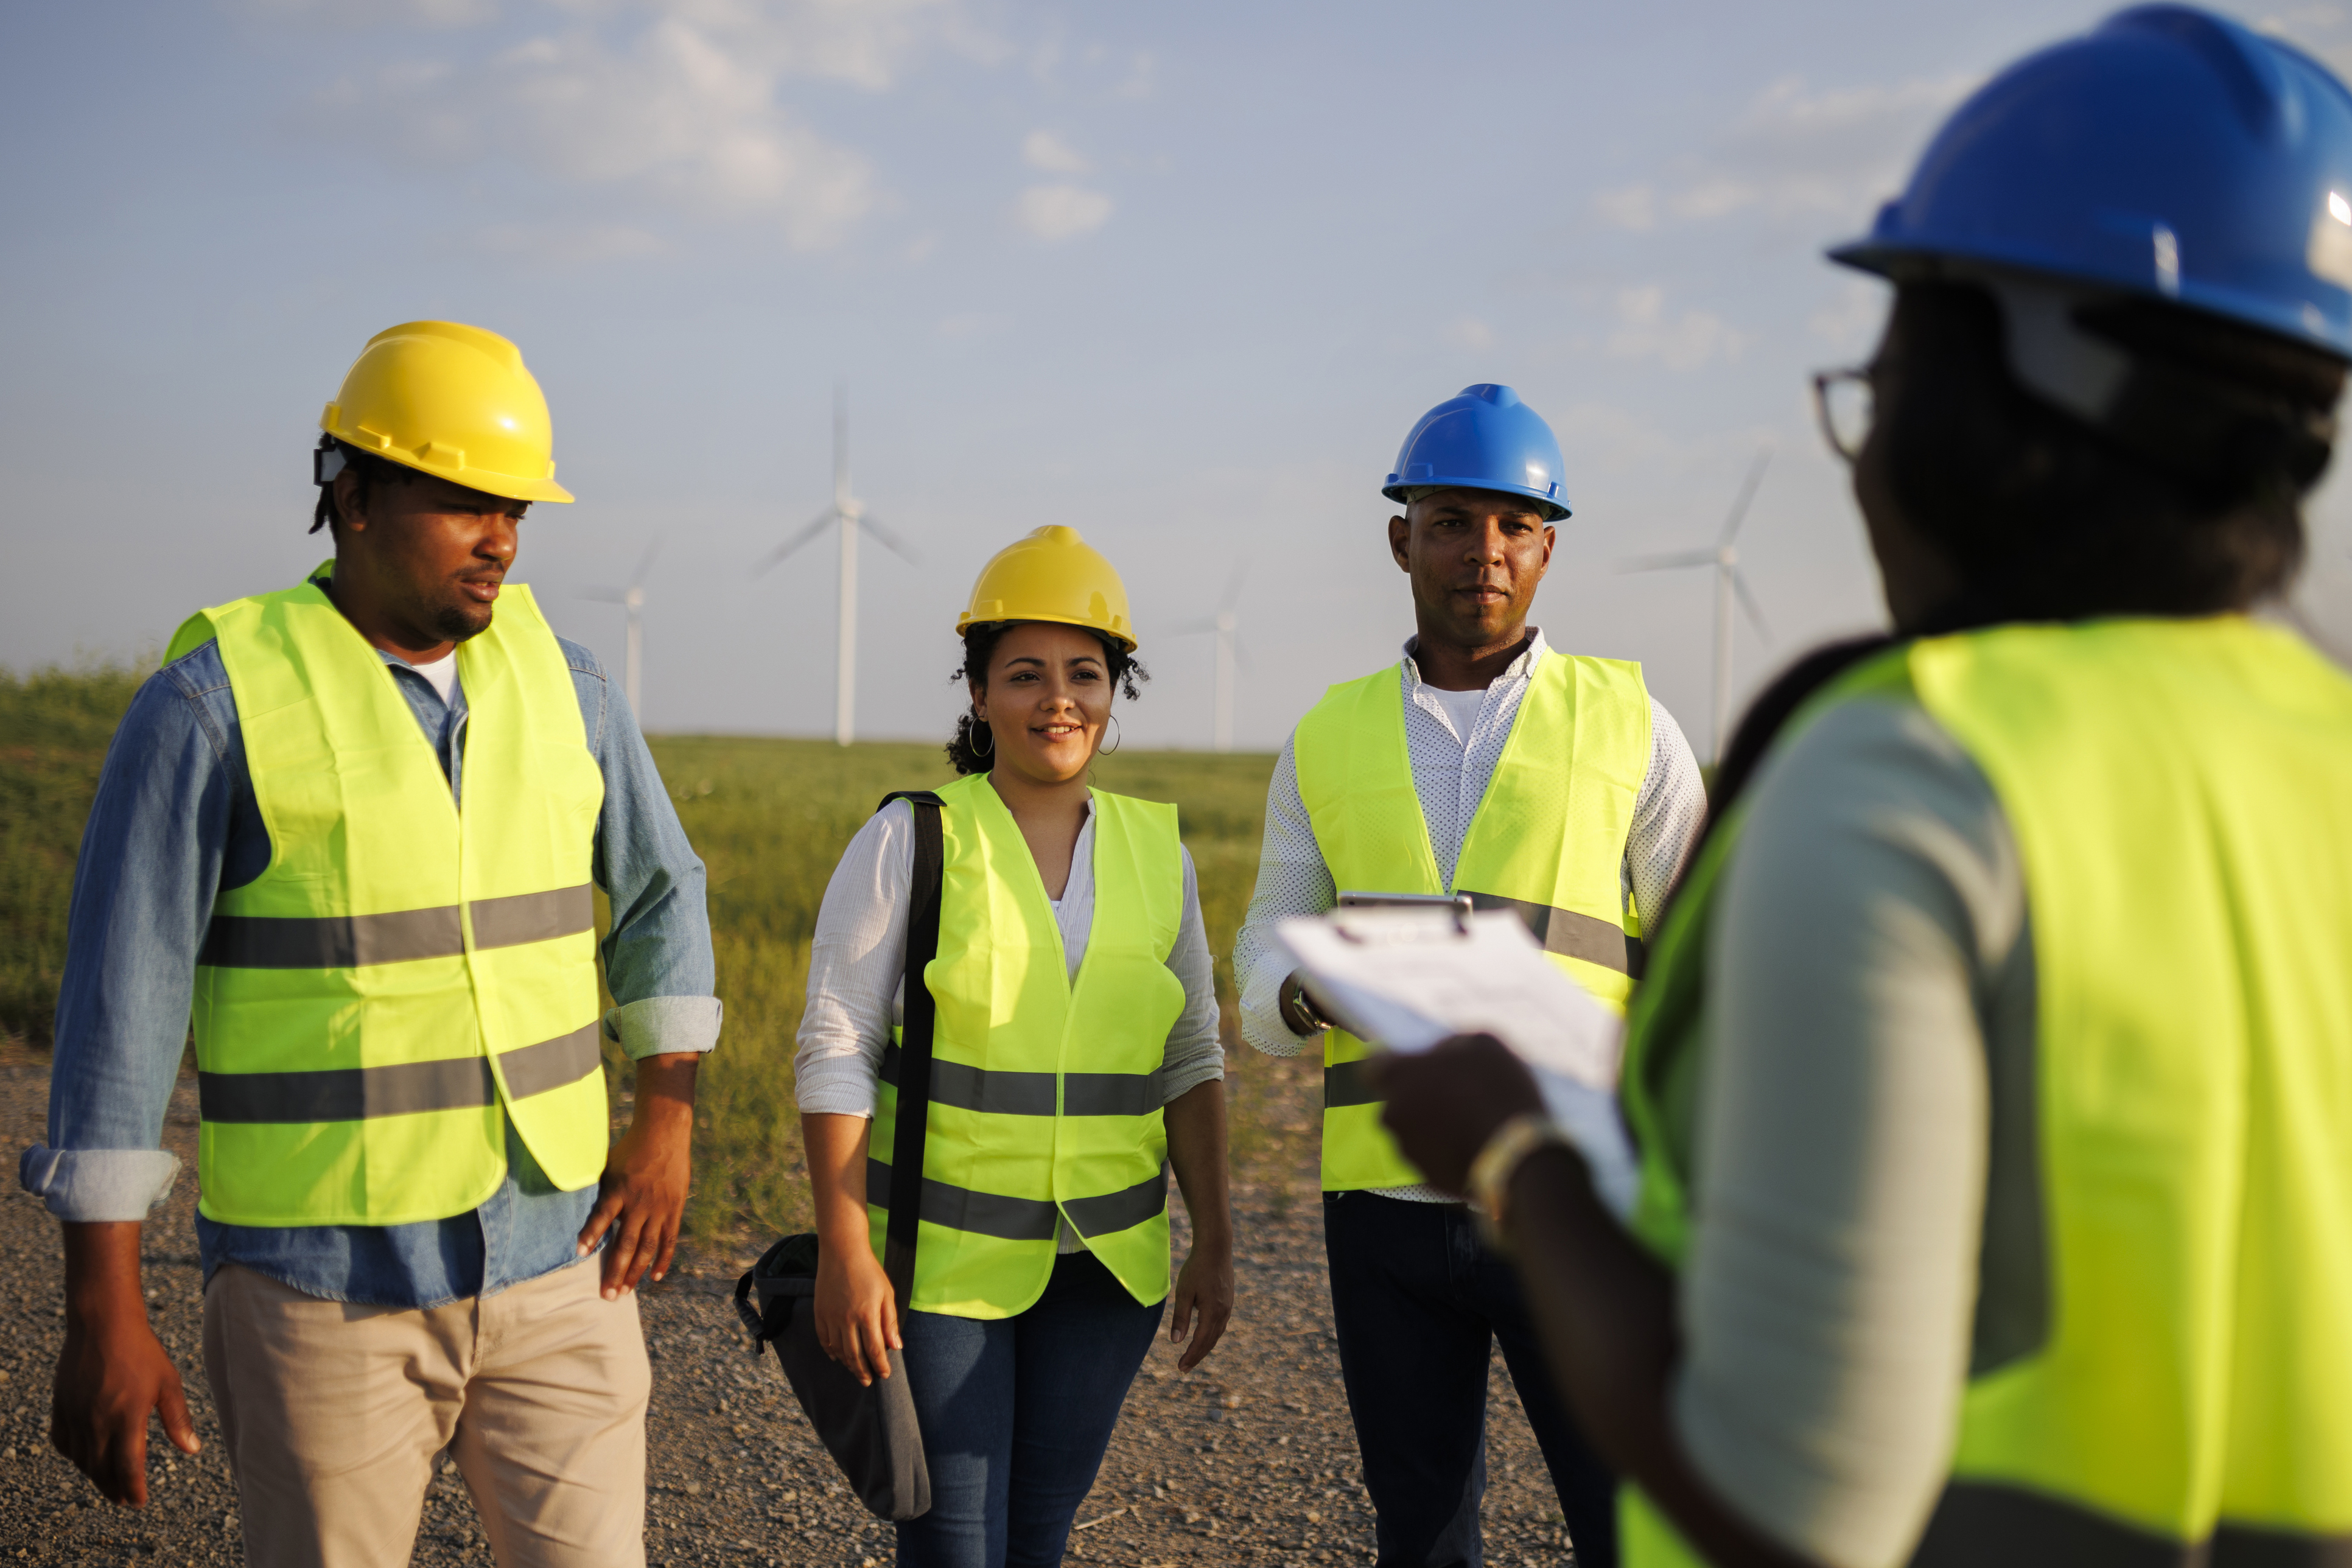 Workers wearing blue and yellow helmets and safety vests stand in a field, facing another worker wearing similar equipment and holding a clipboard. Electric power windmills are visible in the background.